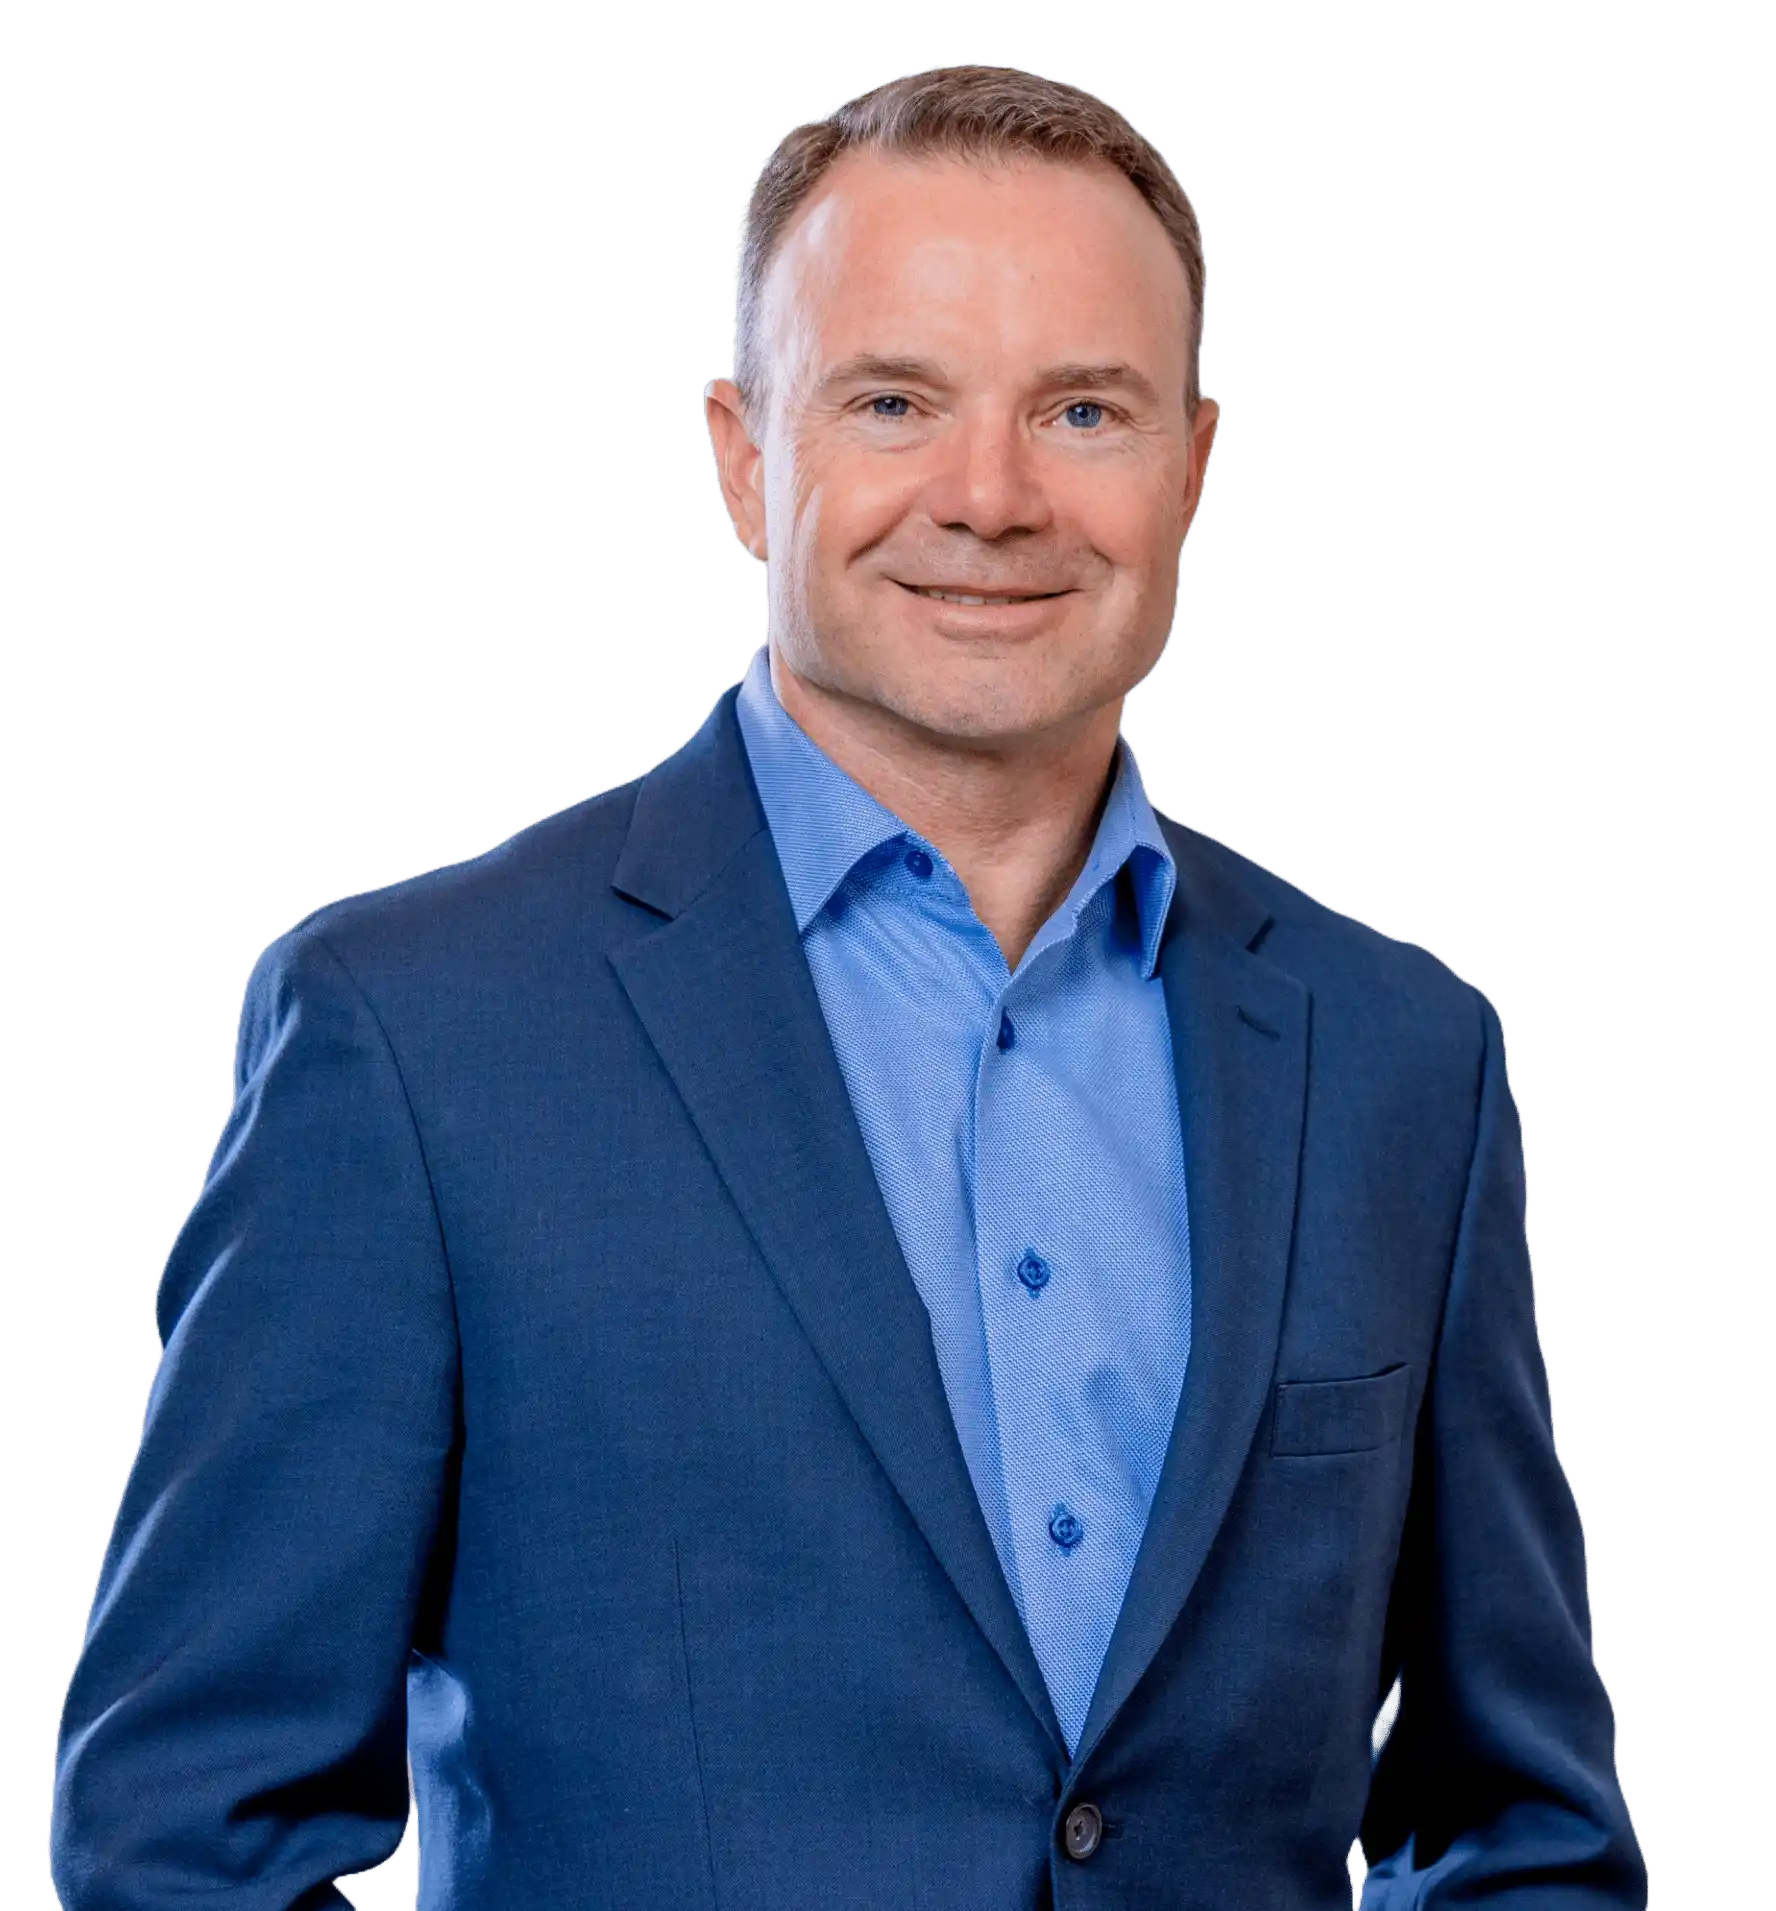 Headshot of Sean Kelly, Founder and CEO of Fortitude Advisors, a technology investment bank.